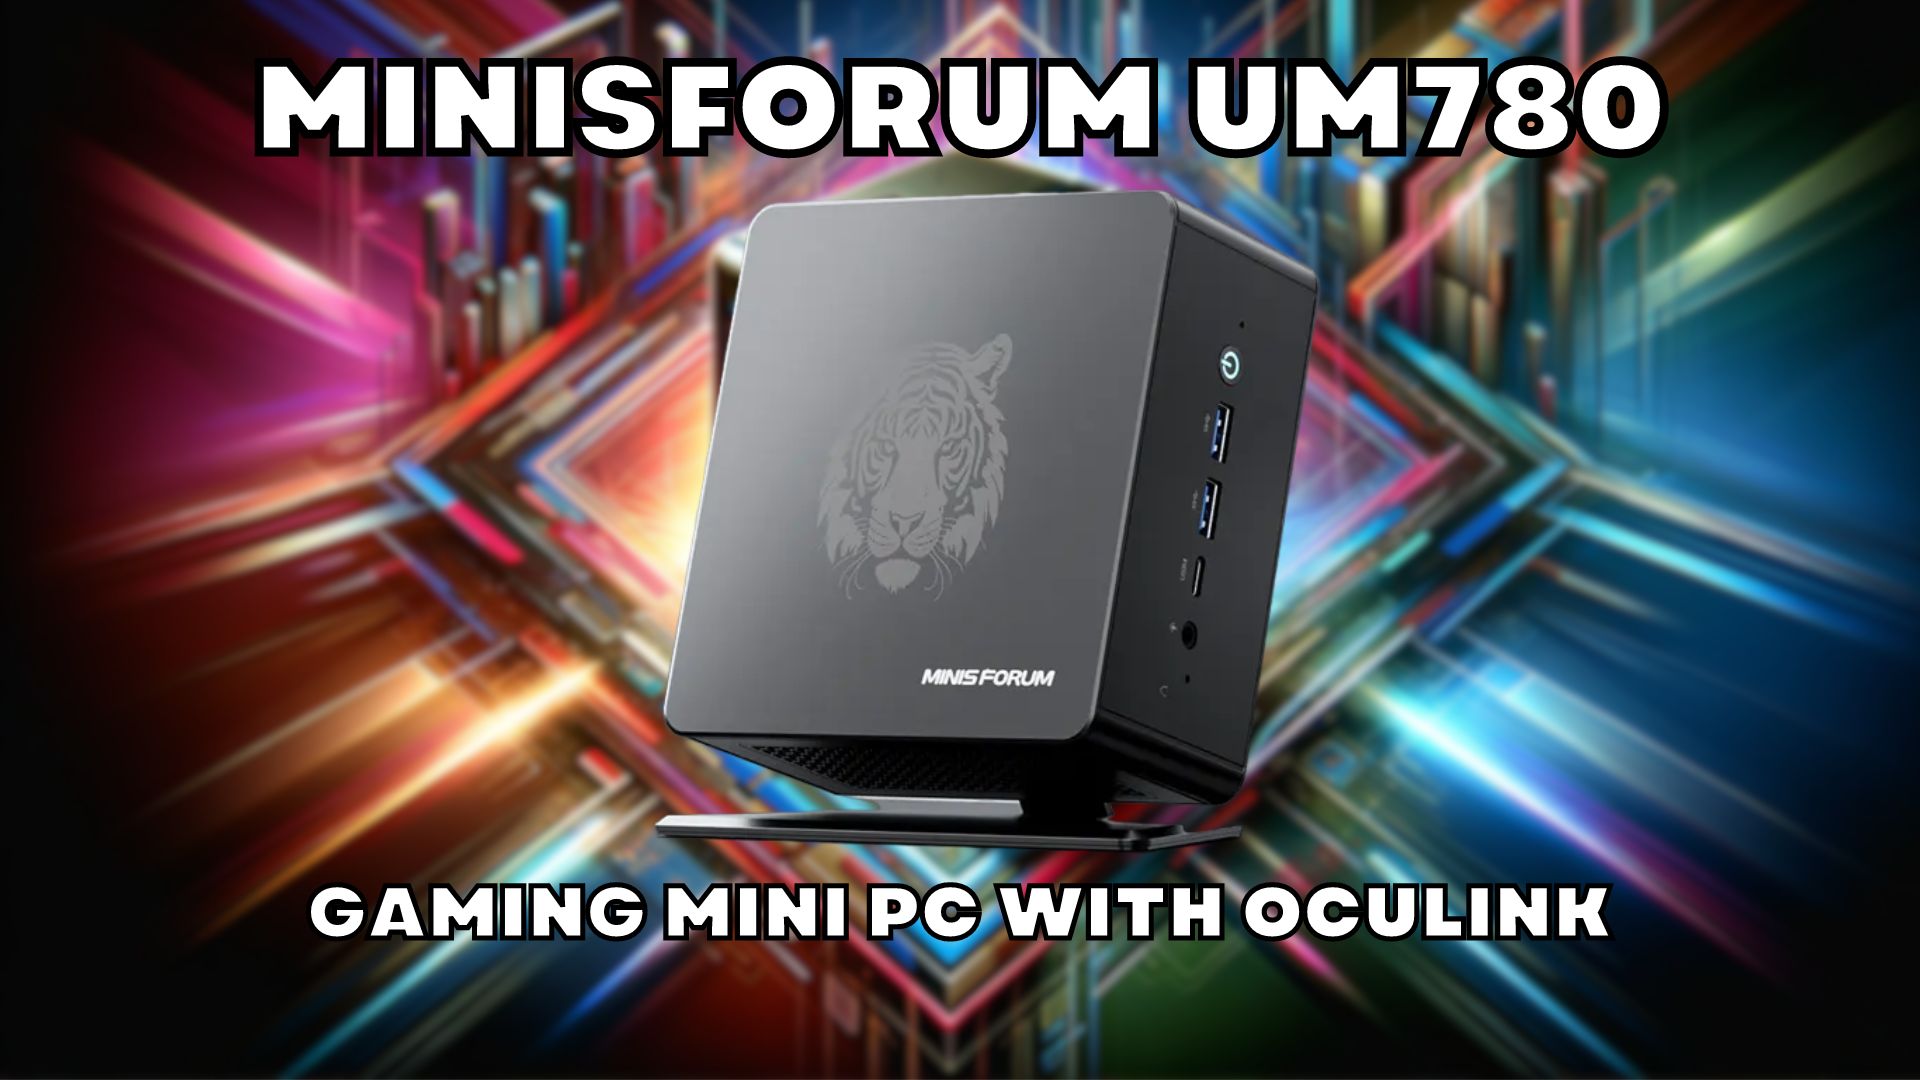 Minisforum UM780 XTX review with video – Our fastest gaming mini PC reviewed so far